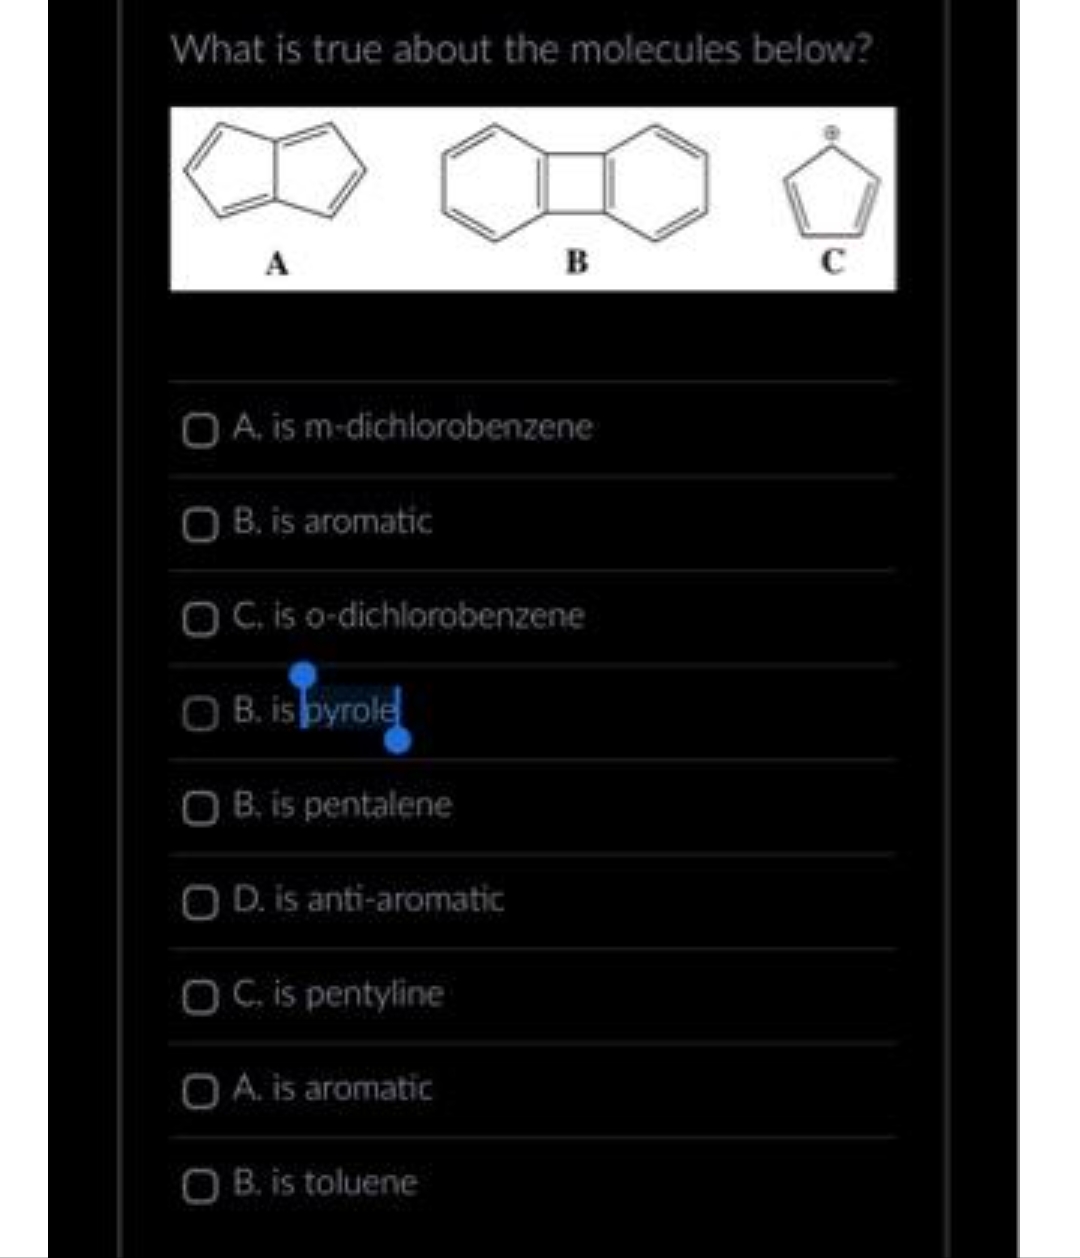 What is true about the molecules below?
B
O A. is m-dichlorobenzene
OB. is aromatic
OC. is o-dichlorobenzene
OB. is pyrole
OB. is pentalene
O D. is anti-aromatic
OC. is pentyline
O A. is aromatic
OB. is toluene
C